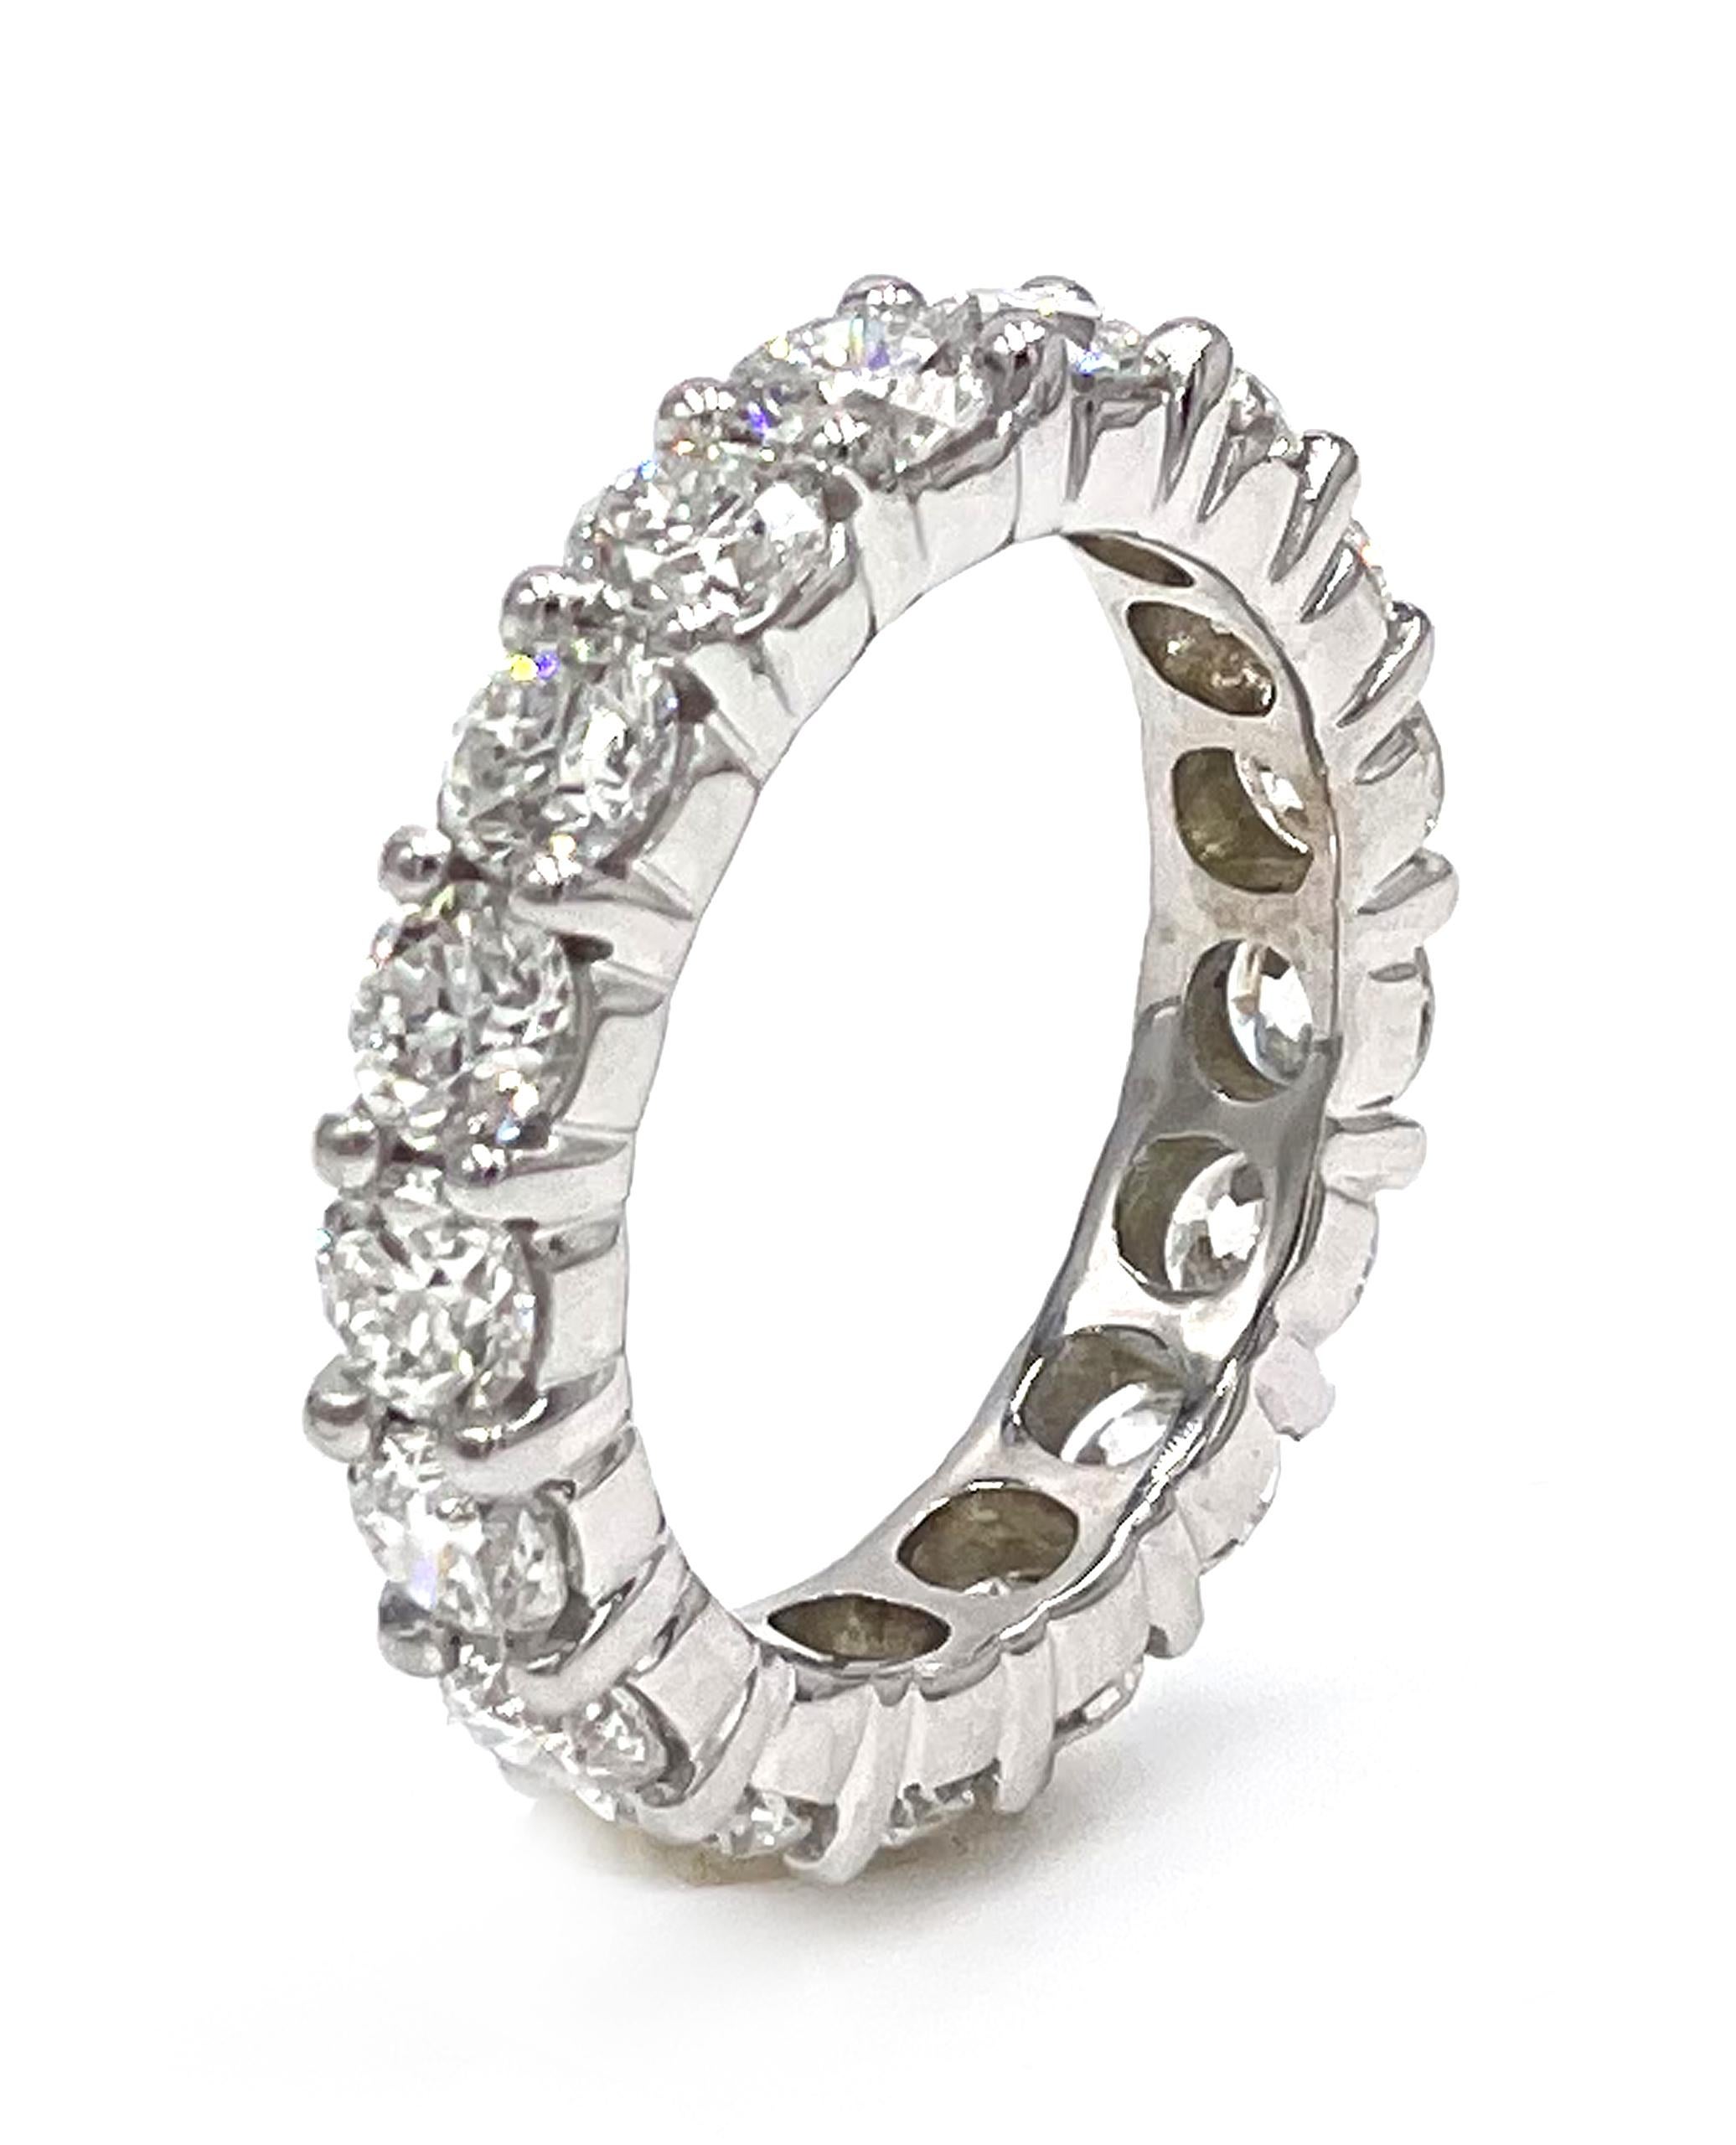 14K white gold shared prong eternity band furnished with 17 round brilliant-cut diamonds 4.06 carats total weight: G/H color, VS2/SI1 clarity.

* Finger size 6